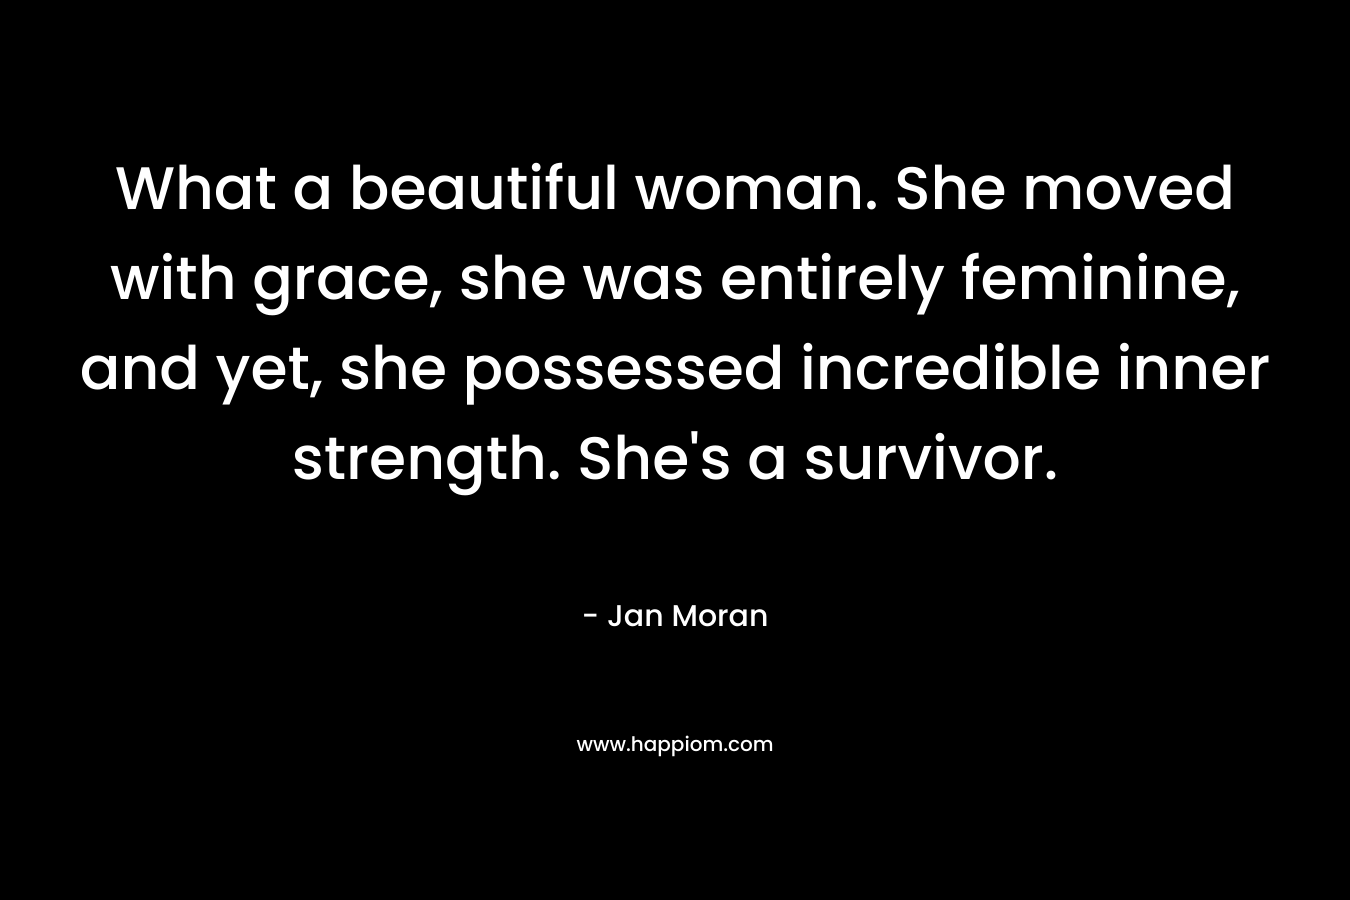 What a beautiful woman. She moved with grace, she was entirely feminine, and yet, she possessed incredible inner strength. She's a survivor.